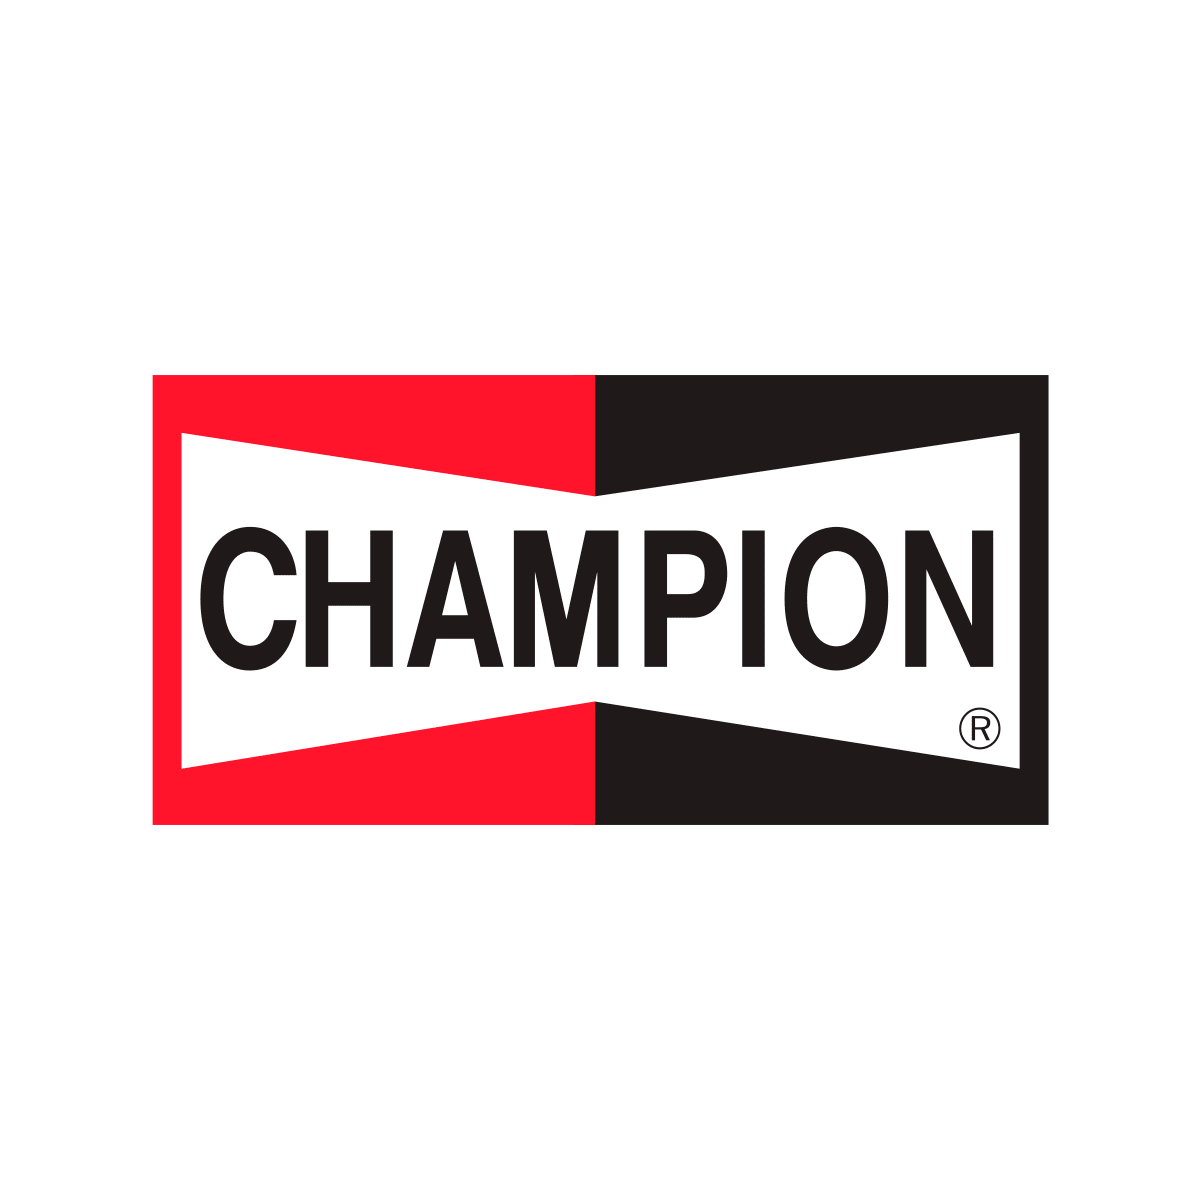 Champion RN11YC4 SHOP PACK 24 PLUGS 322S Genuine Replacement Part Spark Plug